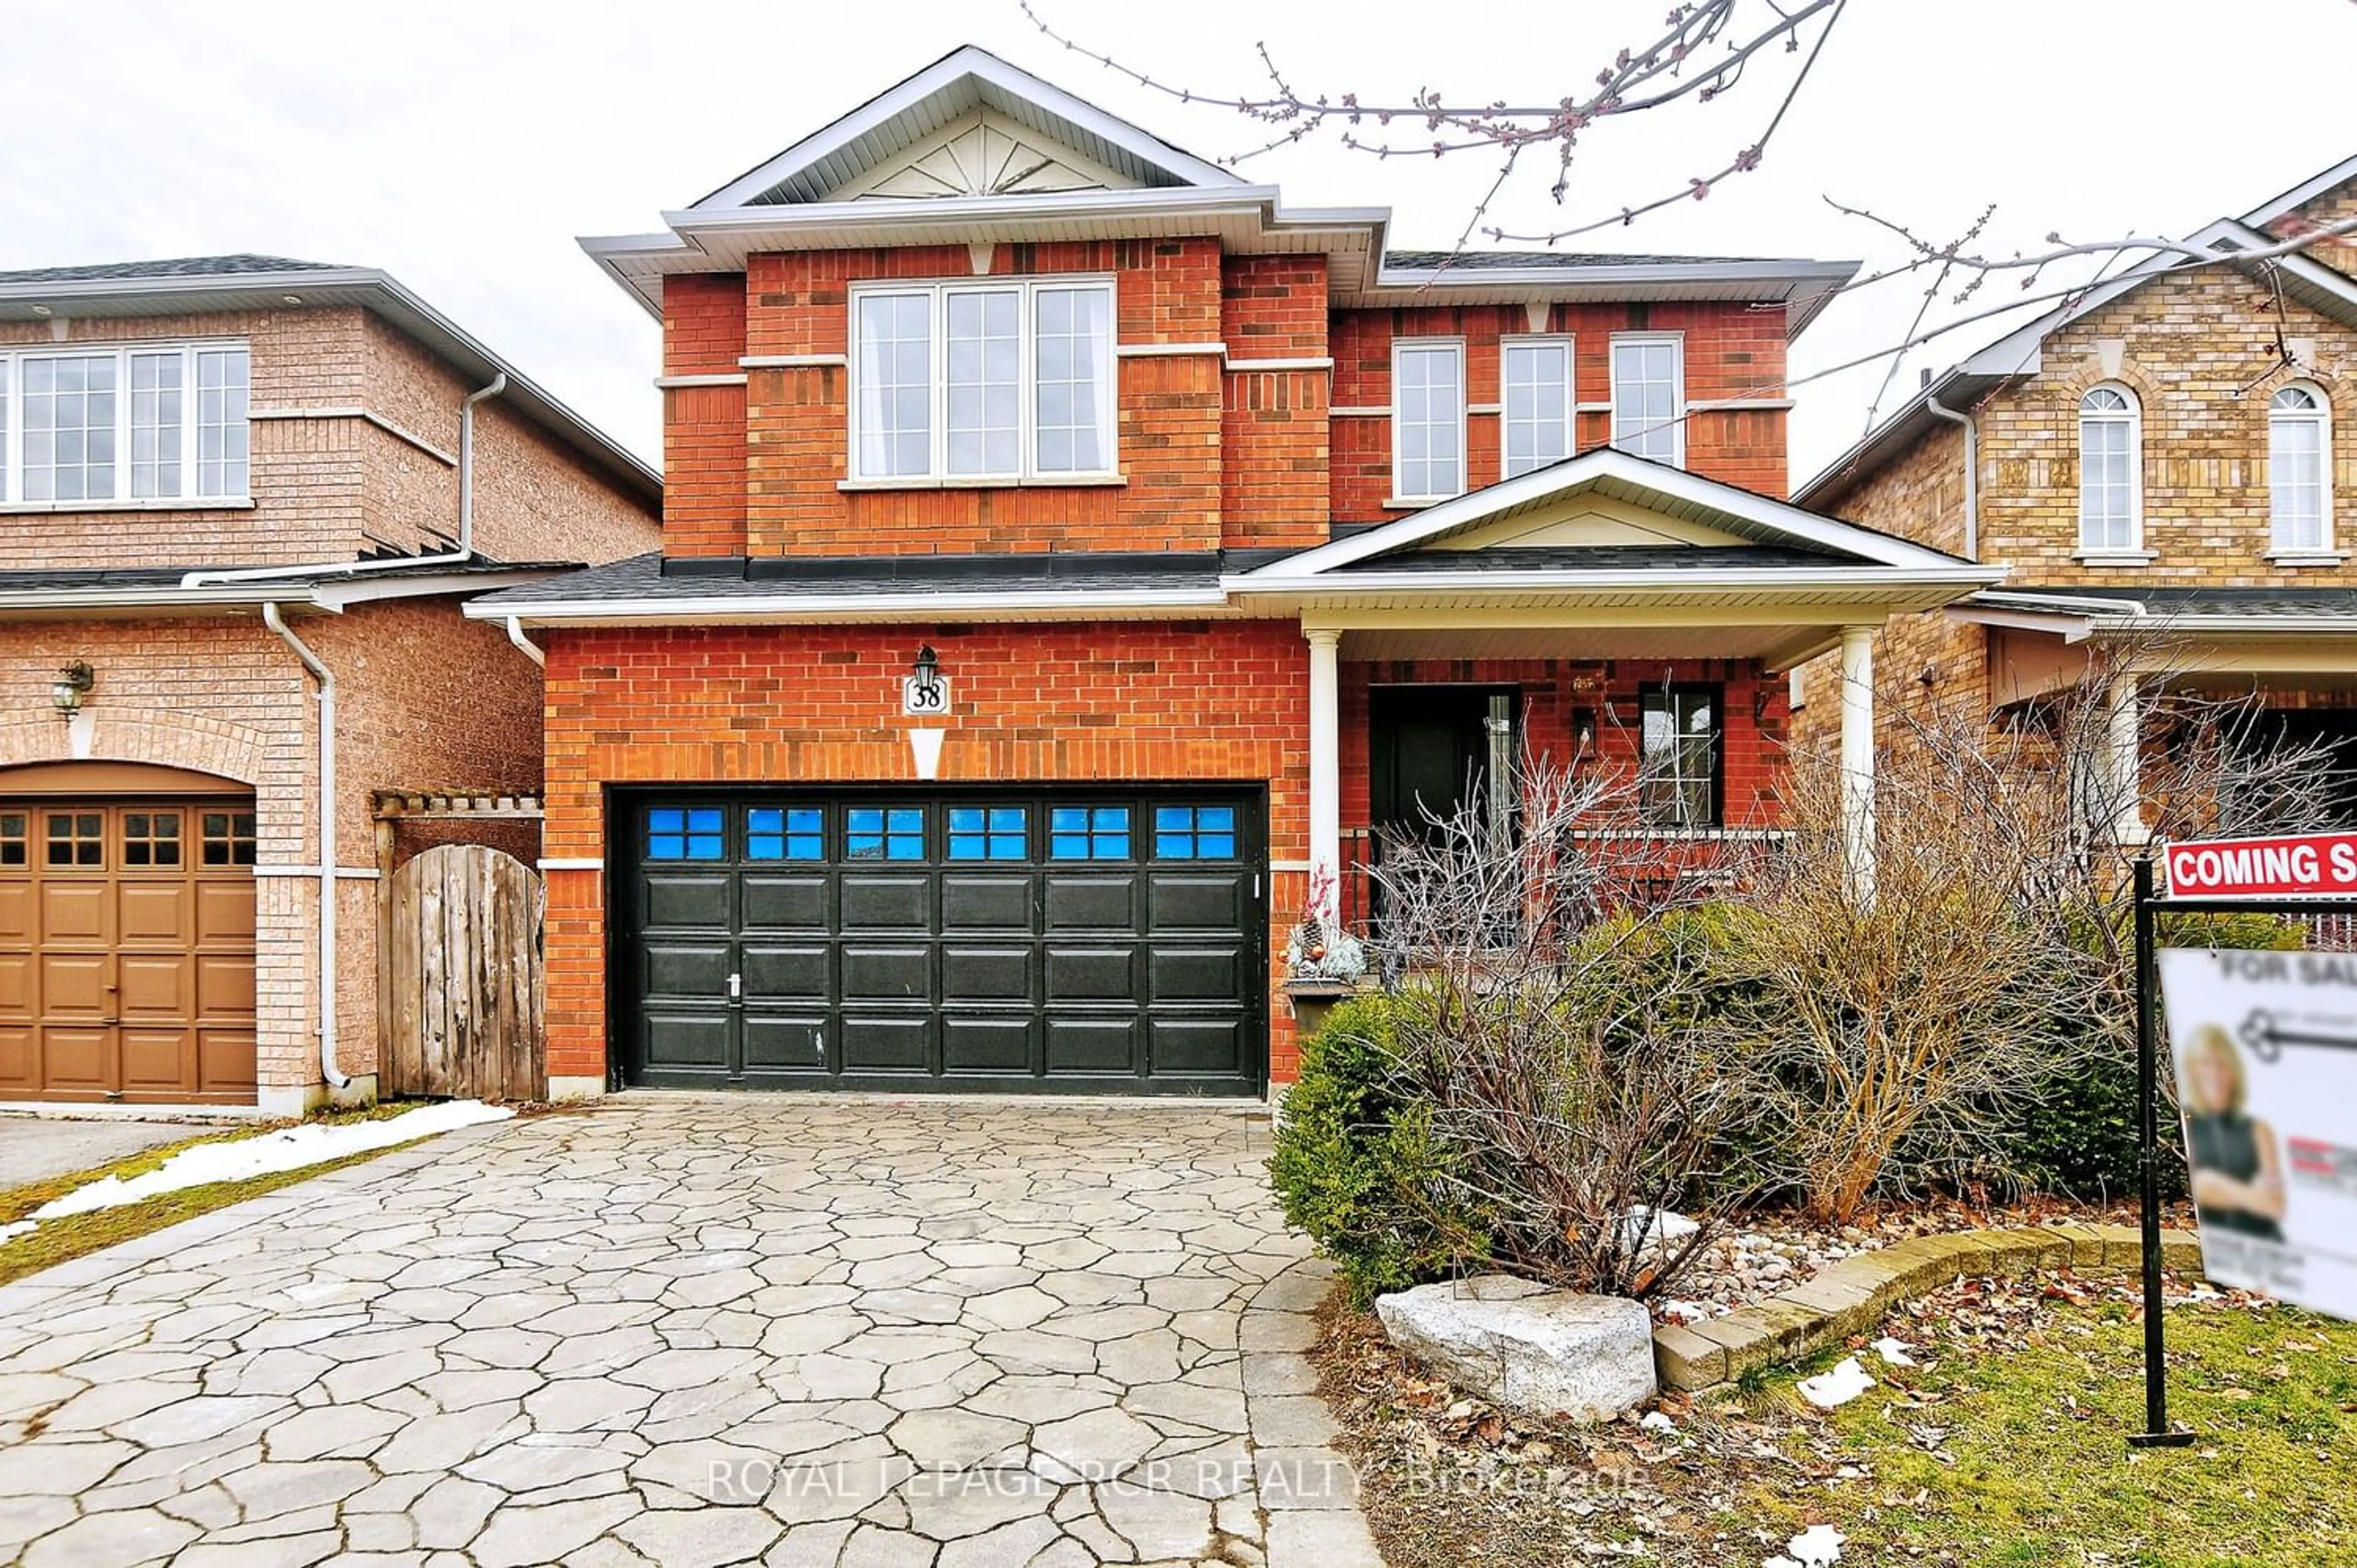 Home with brick exterior material for 38 Delattaye Ave, Aurora Ontario L4G 7T8